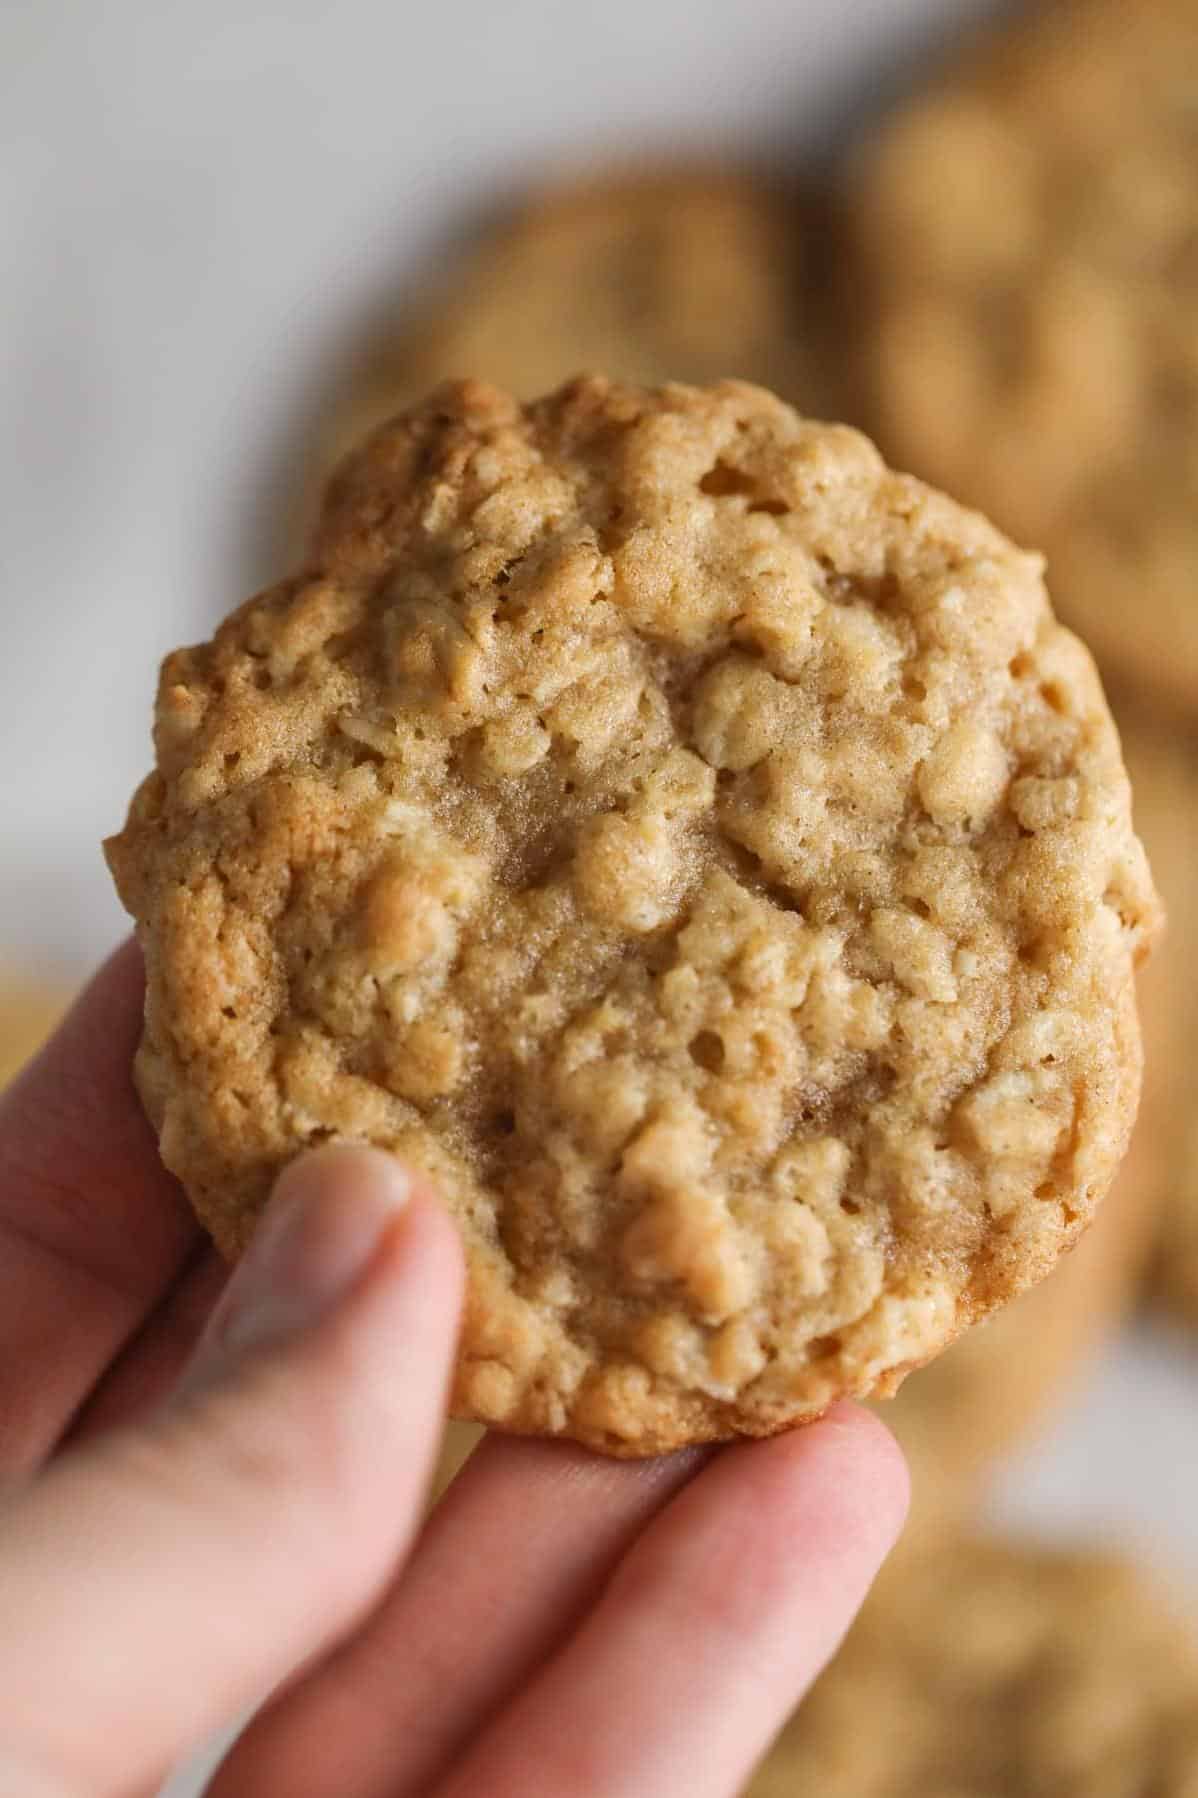  You can never go wrong with a classic oatmeal cookie, and this recipe is sure to satisfy your sweet tooth.